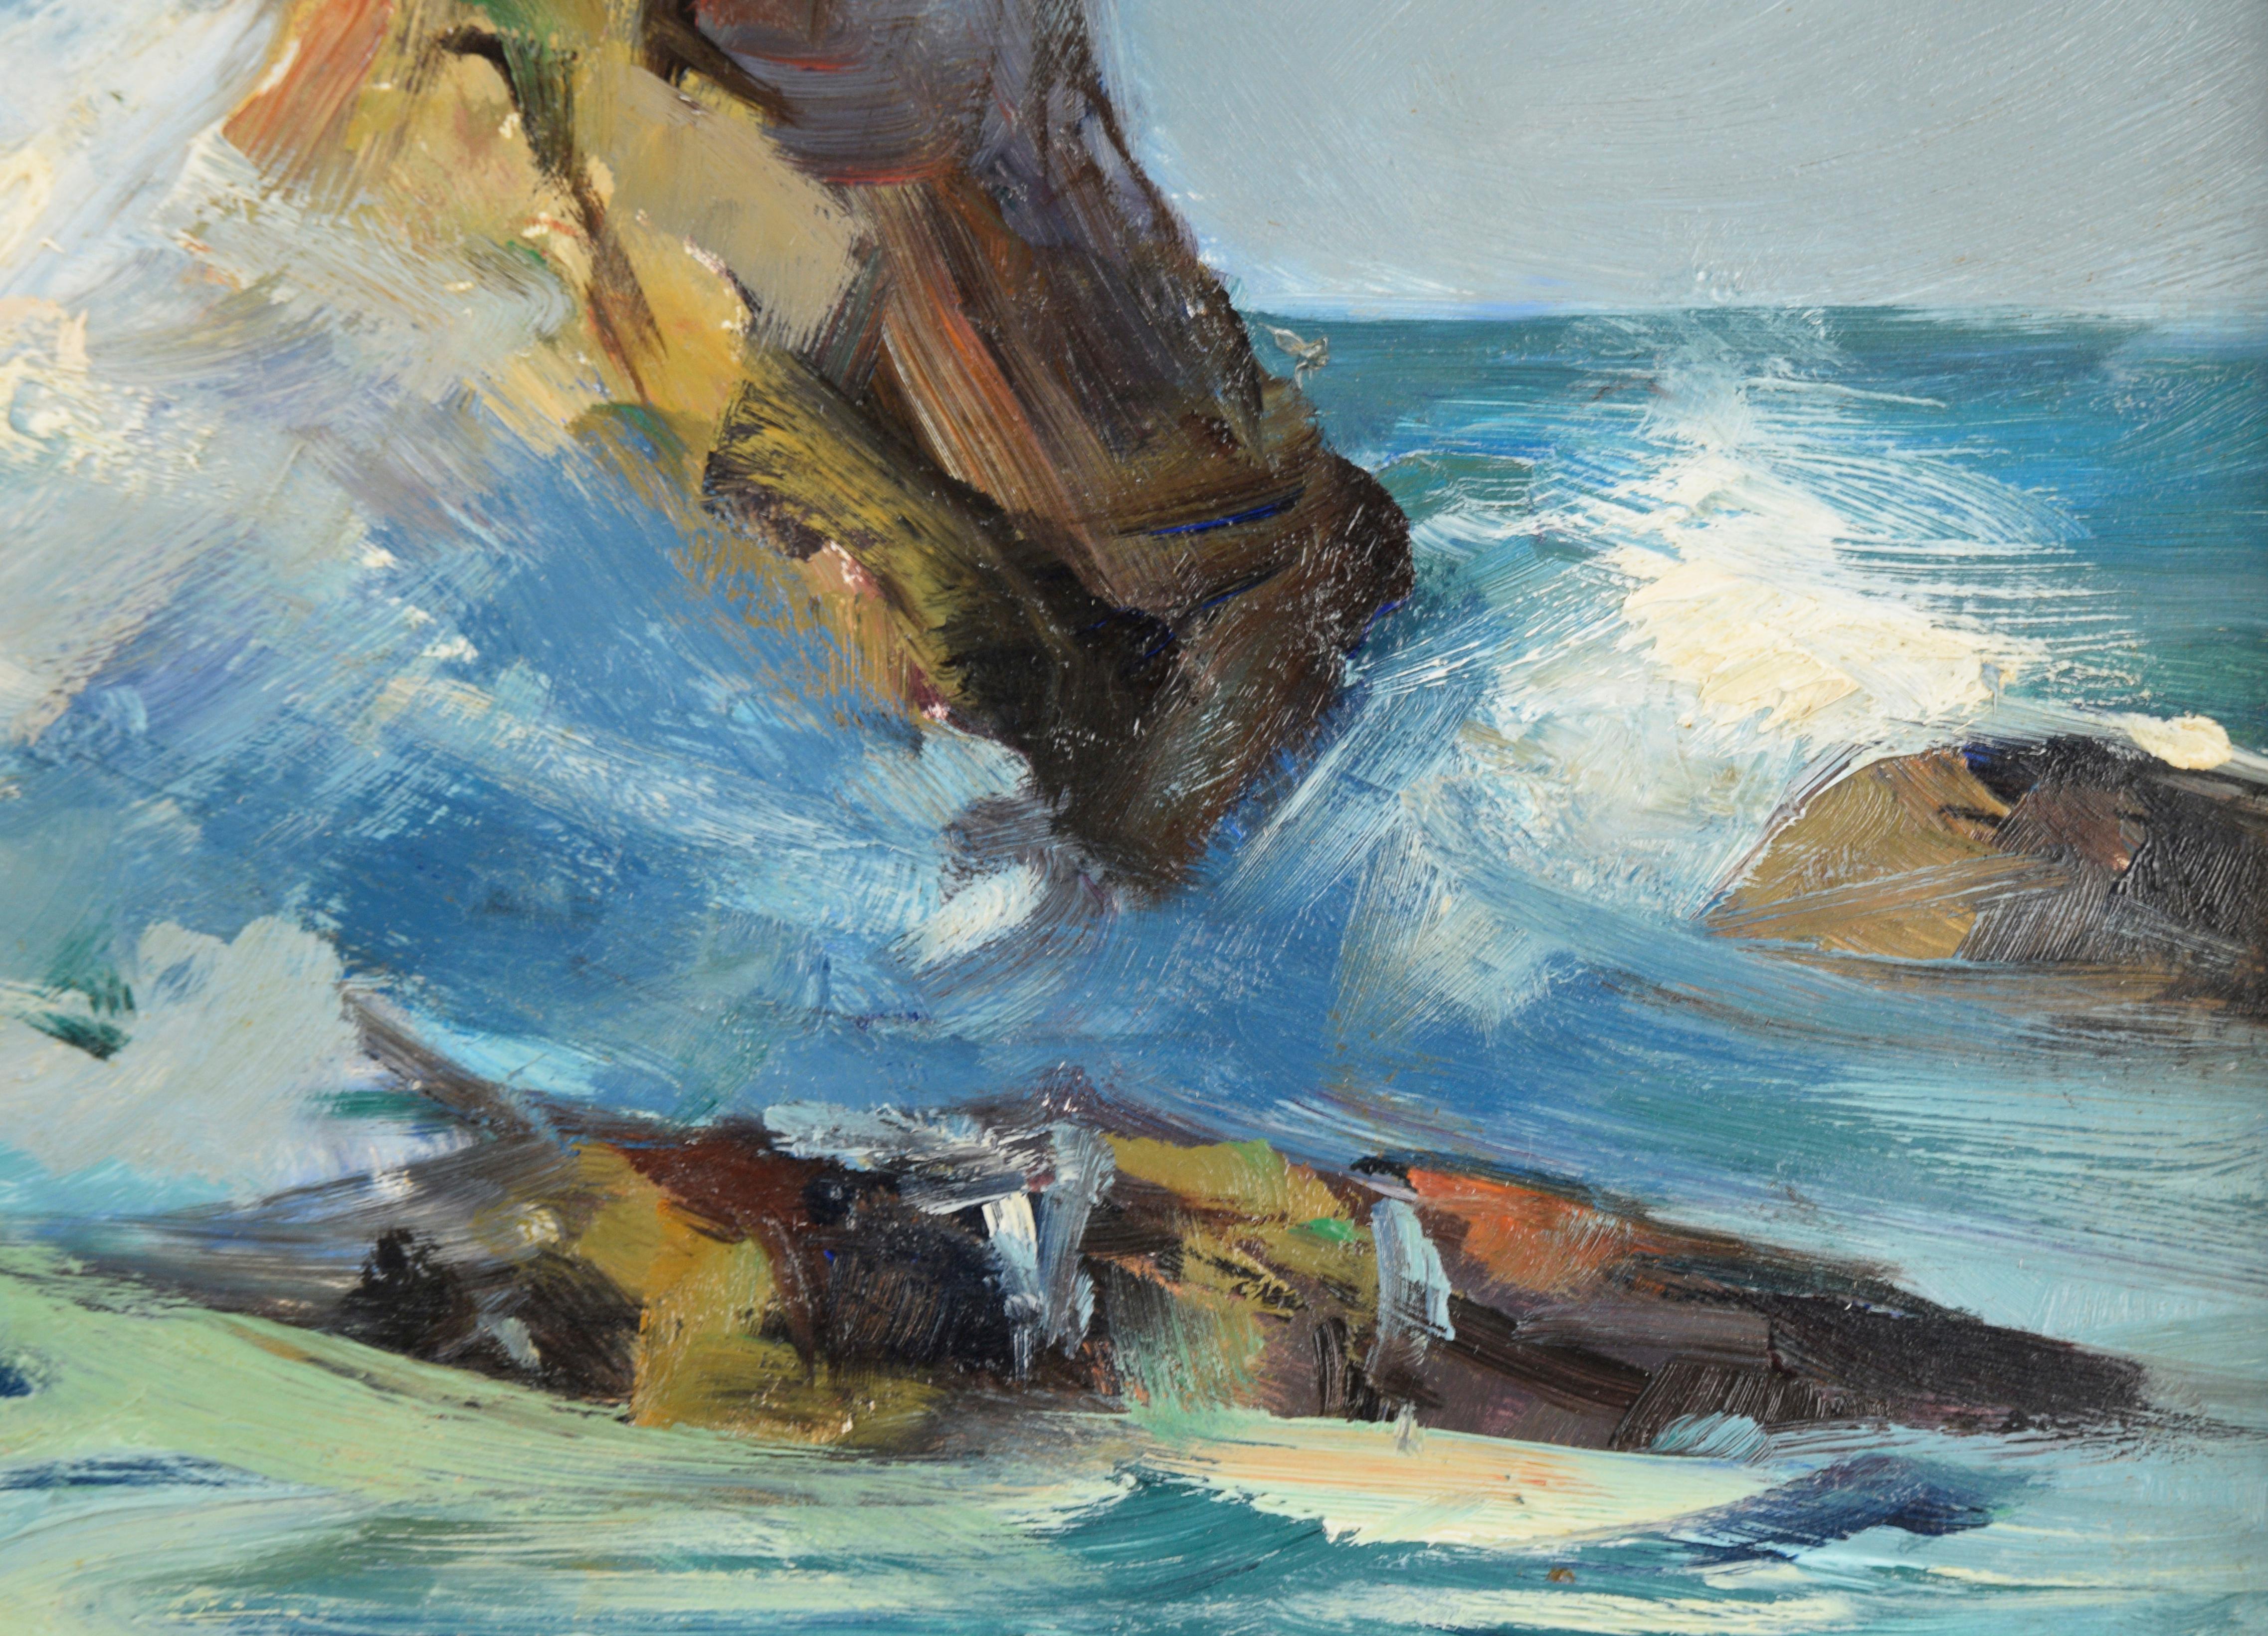 Seagull Flying Above Crashing Waves, Mid Century California Seascape - Brown Landscape Painting by Joseph Frey